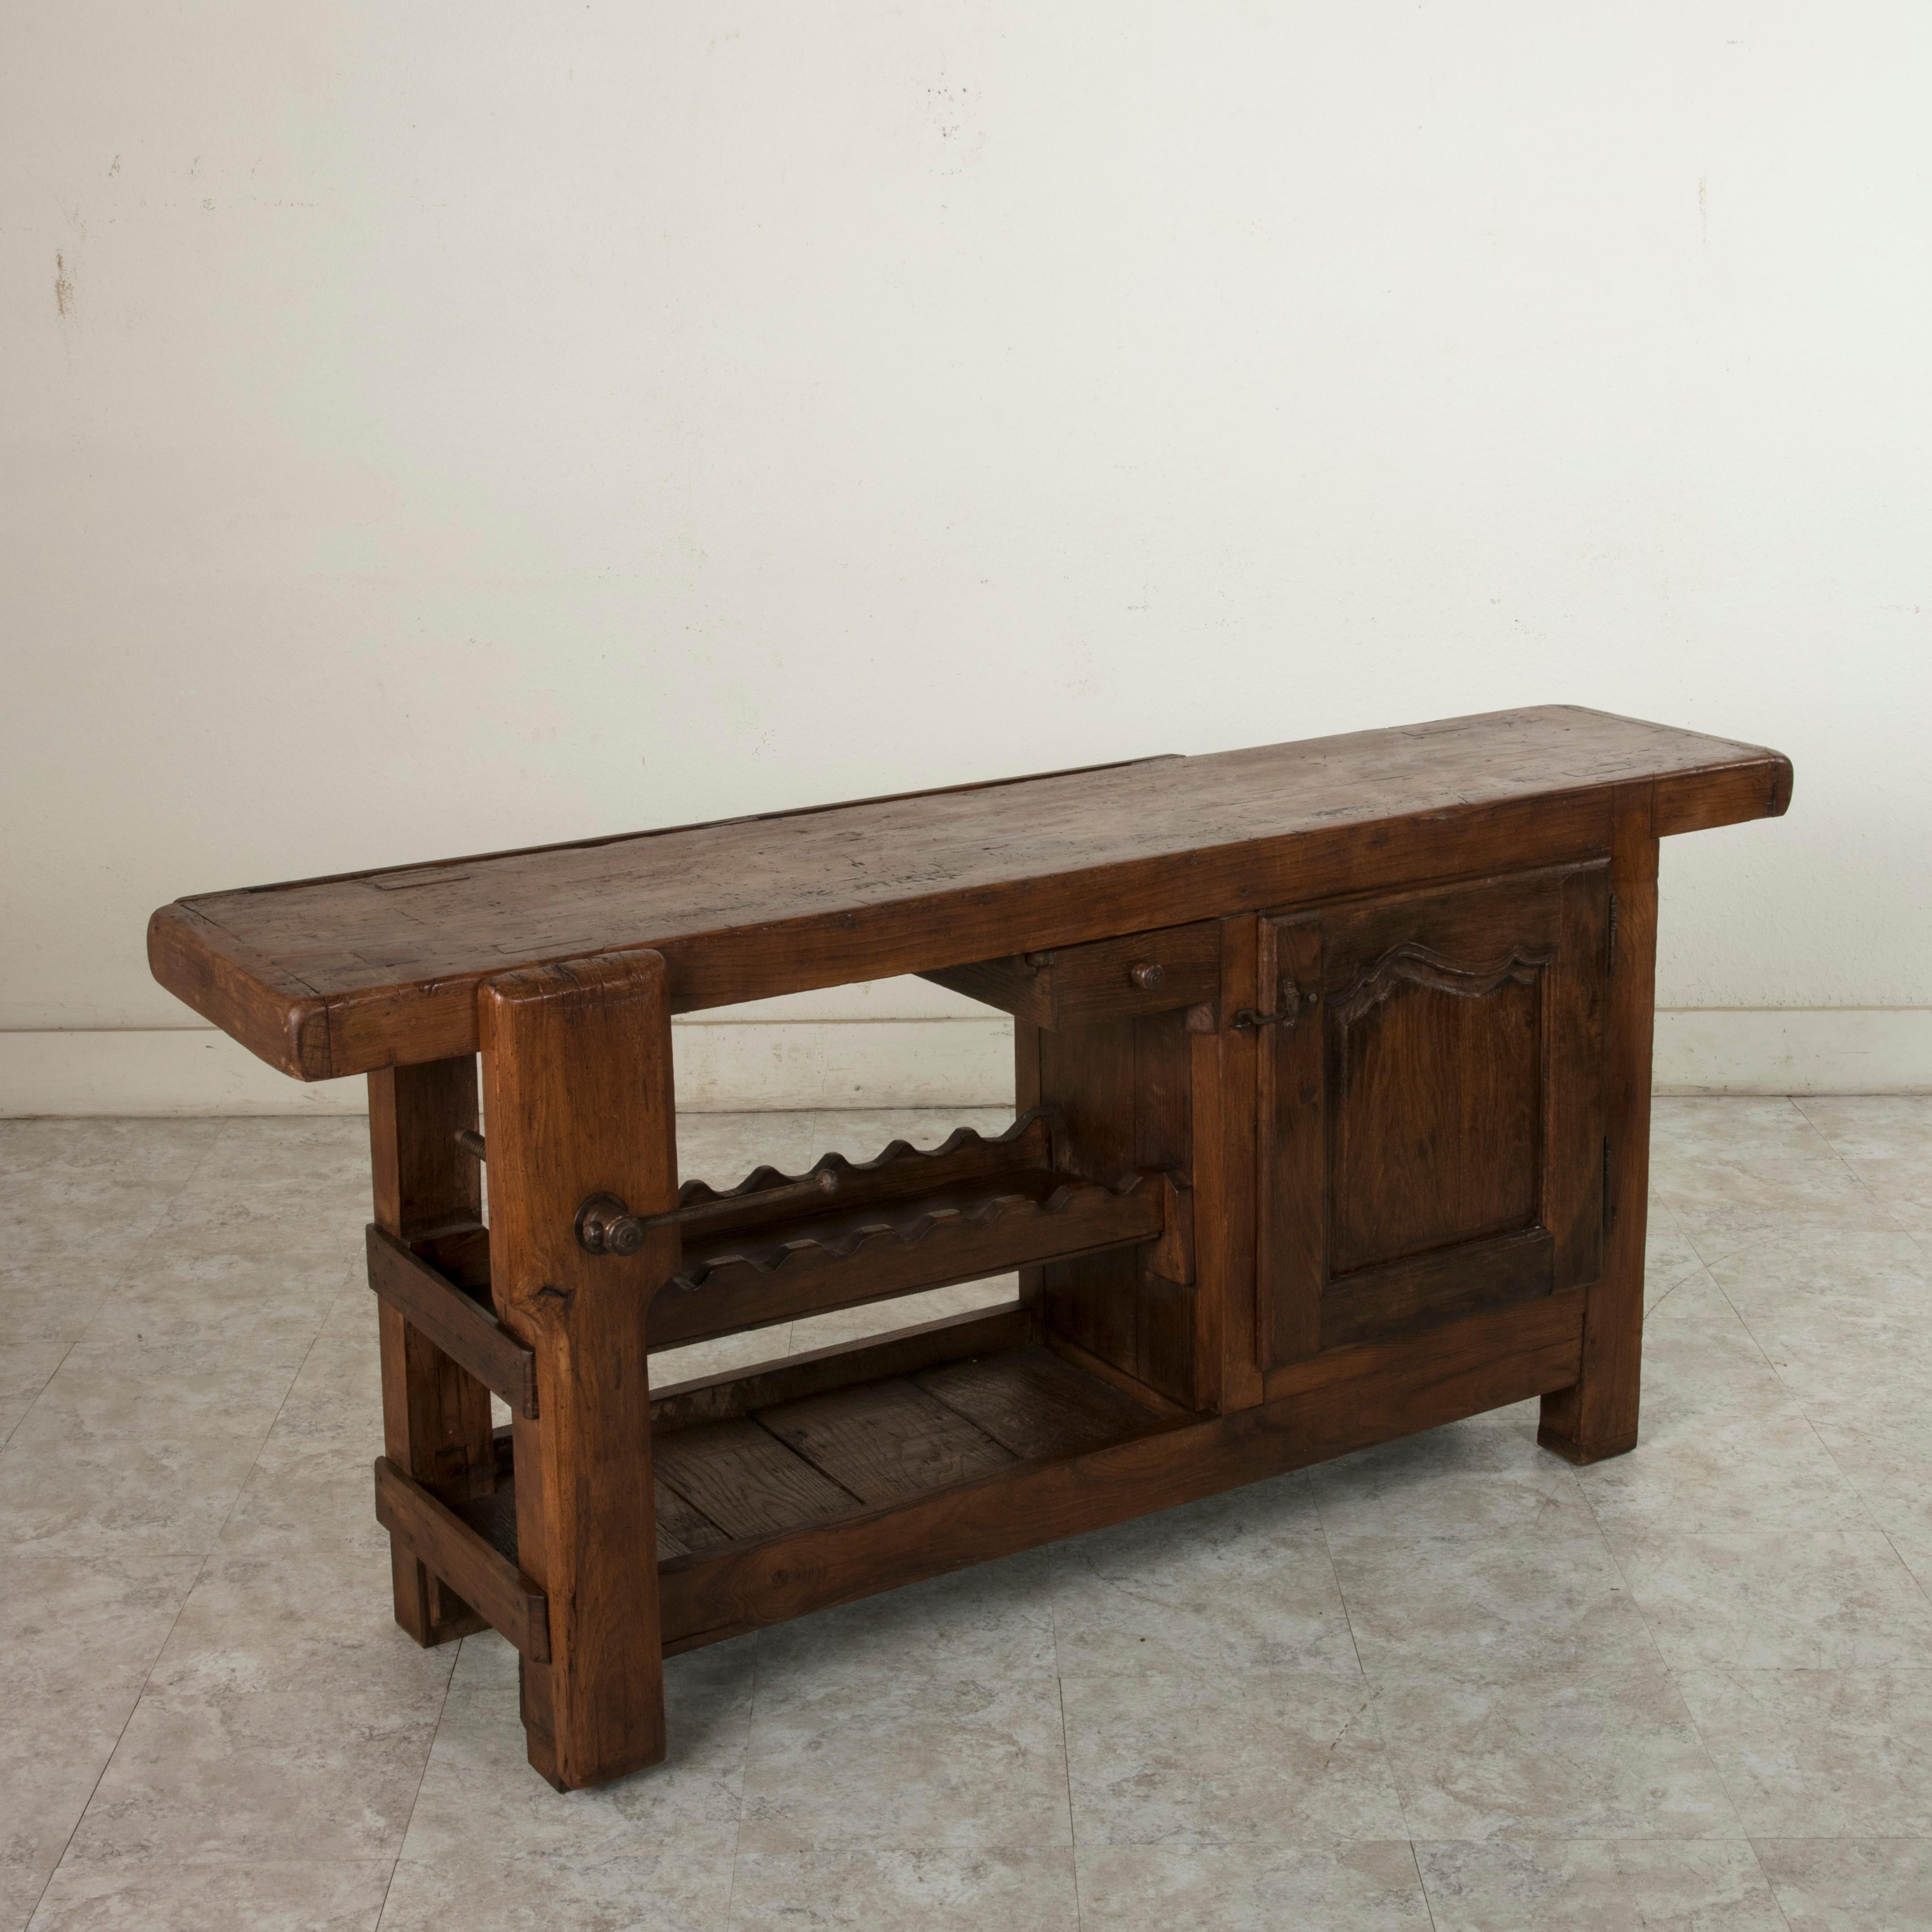 This early 20th century oak workbench is from Normandy, France. Two slots at the back of the top once kept the artisan's tools close at hand. Its closed cabinet with single interior shelf, single drawer, and lower shelf provide ample storage. The